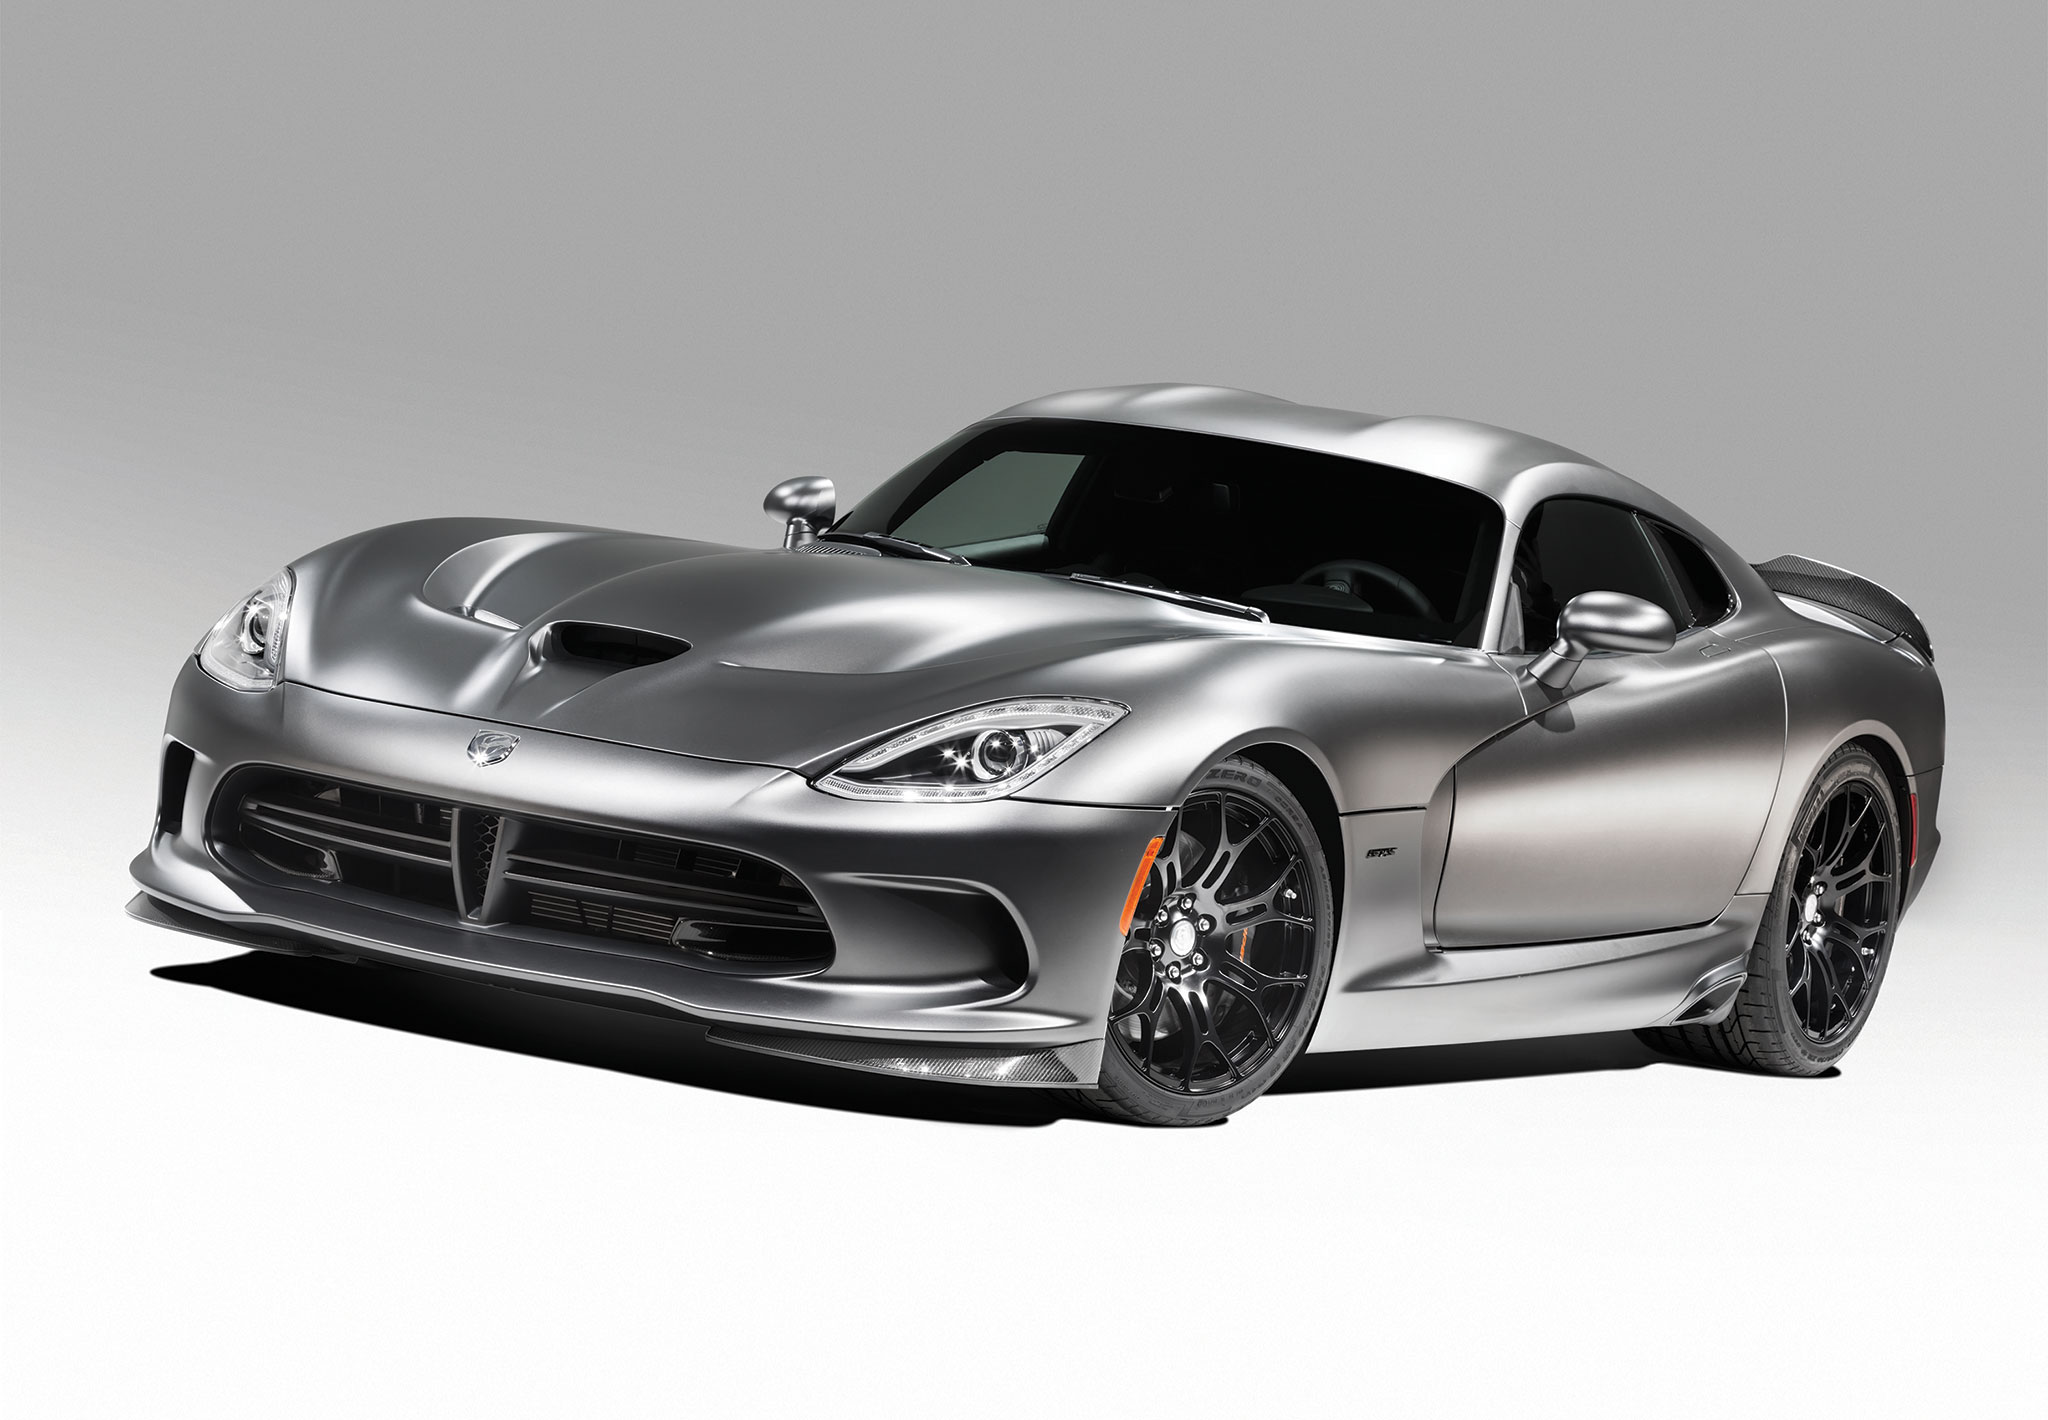 Dodge Srt Viper Ta Anodized Carbon Special Edition Front Photo